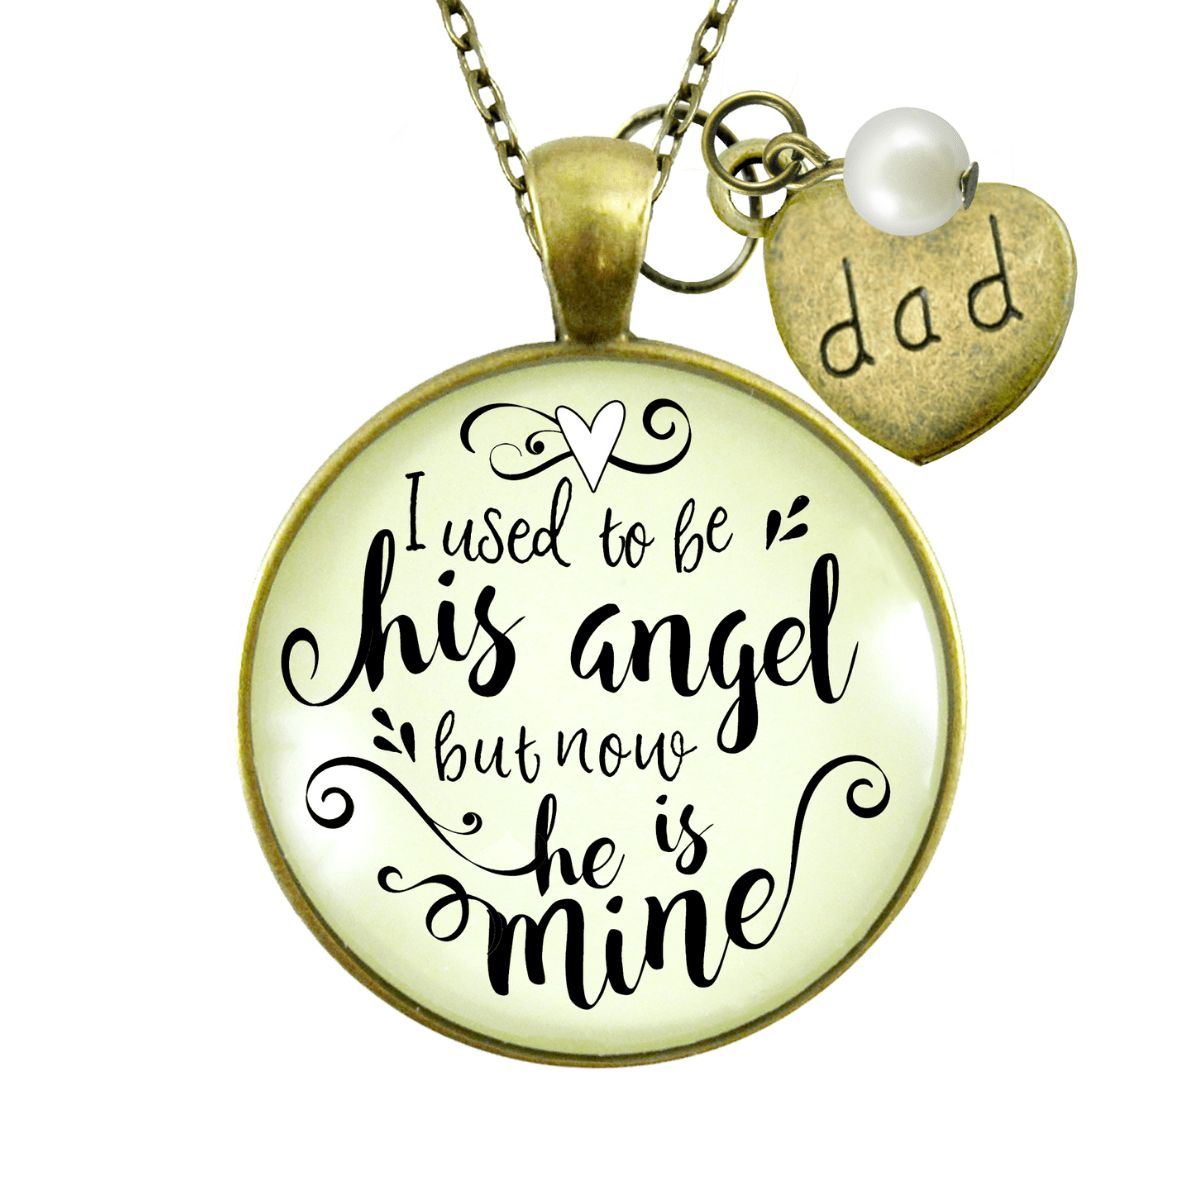 Dad Necklace I Used To Be His Angel Heaven Memorial Jewelry Gift Father Keepsake - Gutsy Goodness Handmade Jewelry;Remembering Dad Memorial Necklace I Used to Be His Angel Now He's Mine